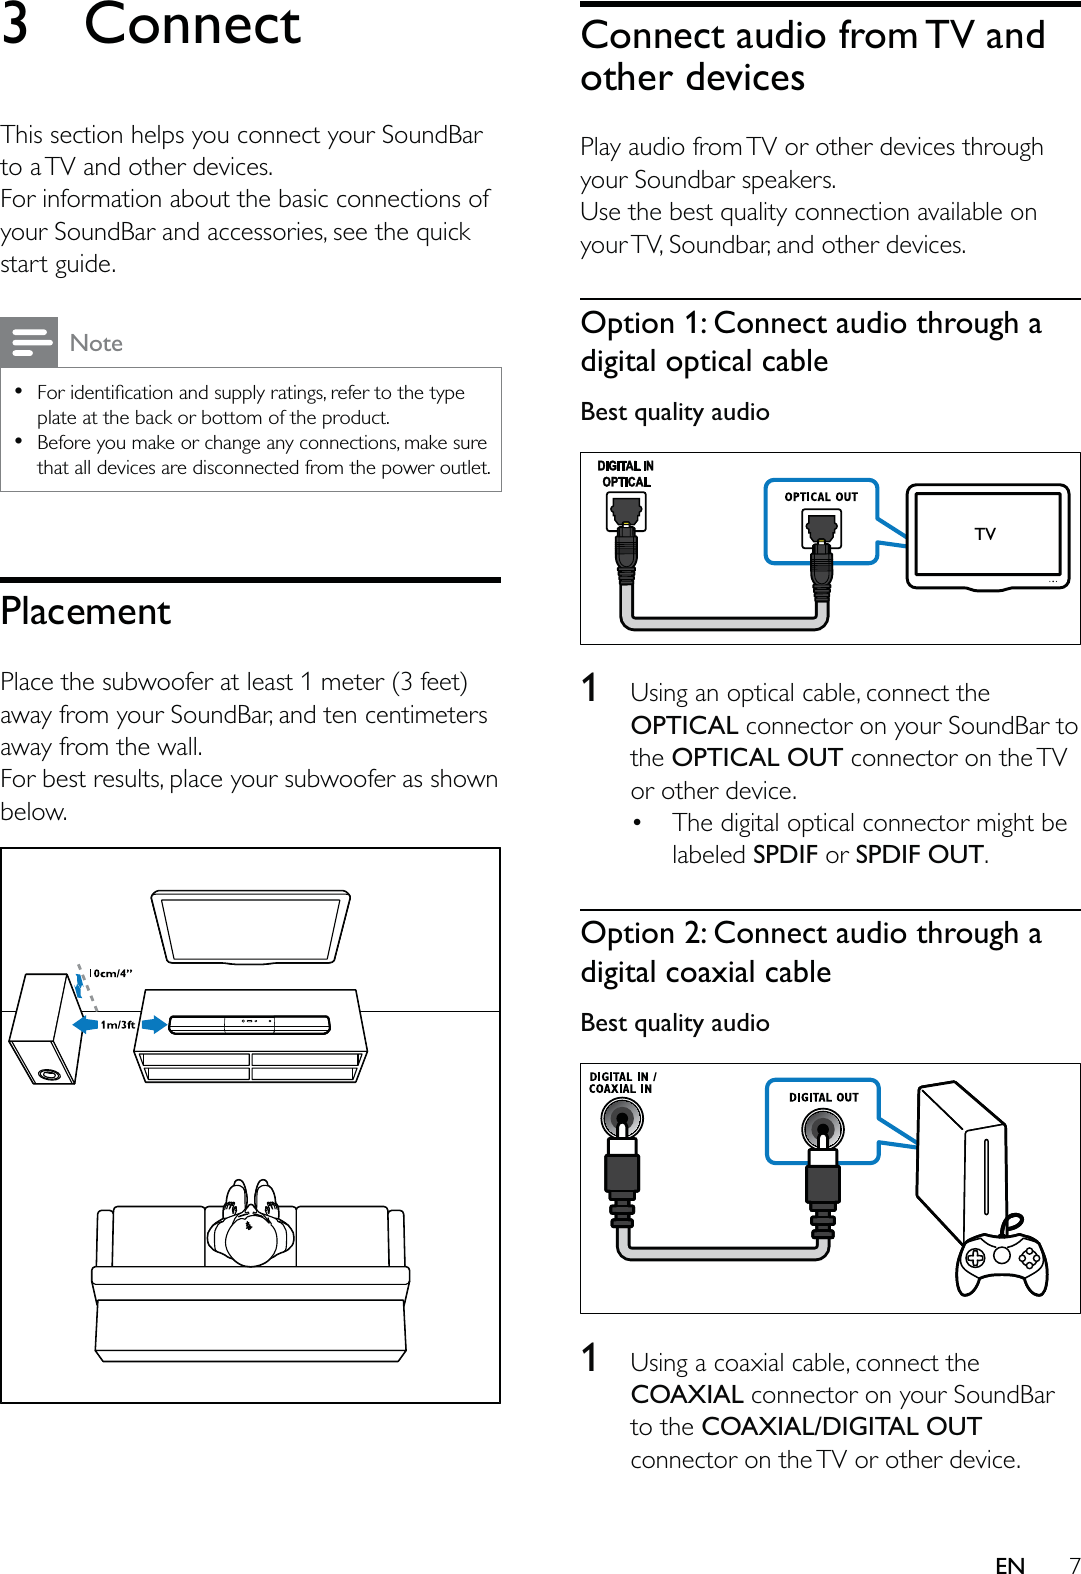 7EN3 ConnectThis section helps you connect your SoundBar to a TV and other devices. For information about the basic connections of your SoundBar and accessories, see the quick start guide. Note  plate at the back or bottom of the product.  Before you make or change any connections, make sure that all devices are disconnected from the power outlet.PlacementPlace the subwoofer at least 1 meter (3 feet) away from your SoundBar, and ten centimeters away from the wall.For best results, place your subwoofer as shown below. Connect audio from TV and other devicesPlay audio from TV or other devices through your Soundbar speakers.Use the best quality connection available on your TV, Soundbar, and other devices. Option 1: Connect audio through a digital optical cableBest quality audio  1  Using an optical cable, connect the OPTICAL connector on your SoundBar to the OPTICAL OUT connector on the TV or other device.  The digital optical connector might be labeled SPDIF or SPDIF OUT. Option 2: Connect audio through a digital coaxial cableBest quality audio  1  Using a coaxial cable, connect the COAXIAL connector on your SoundBar to the COAXIAL/DIGITAL OUT connector on the TV or other device. TV